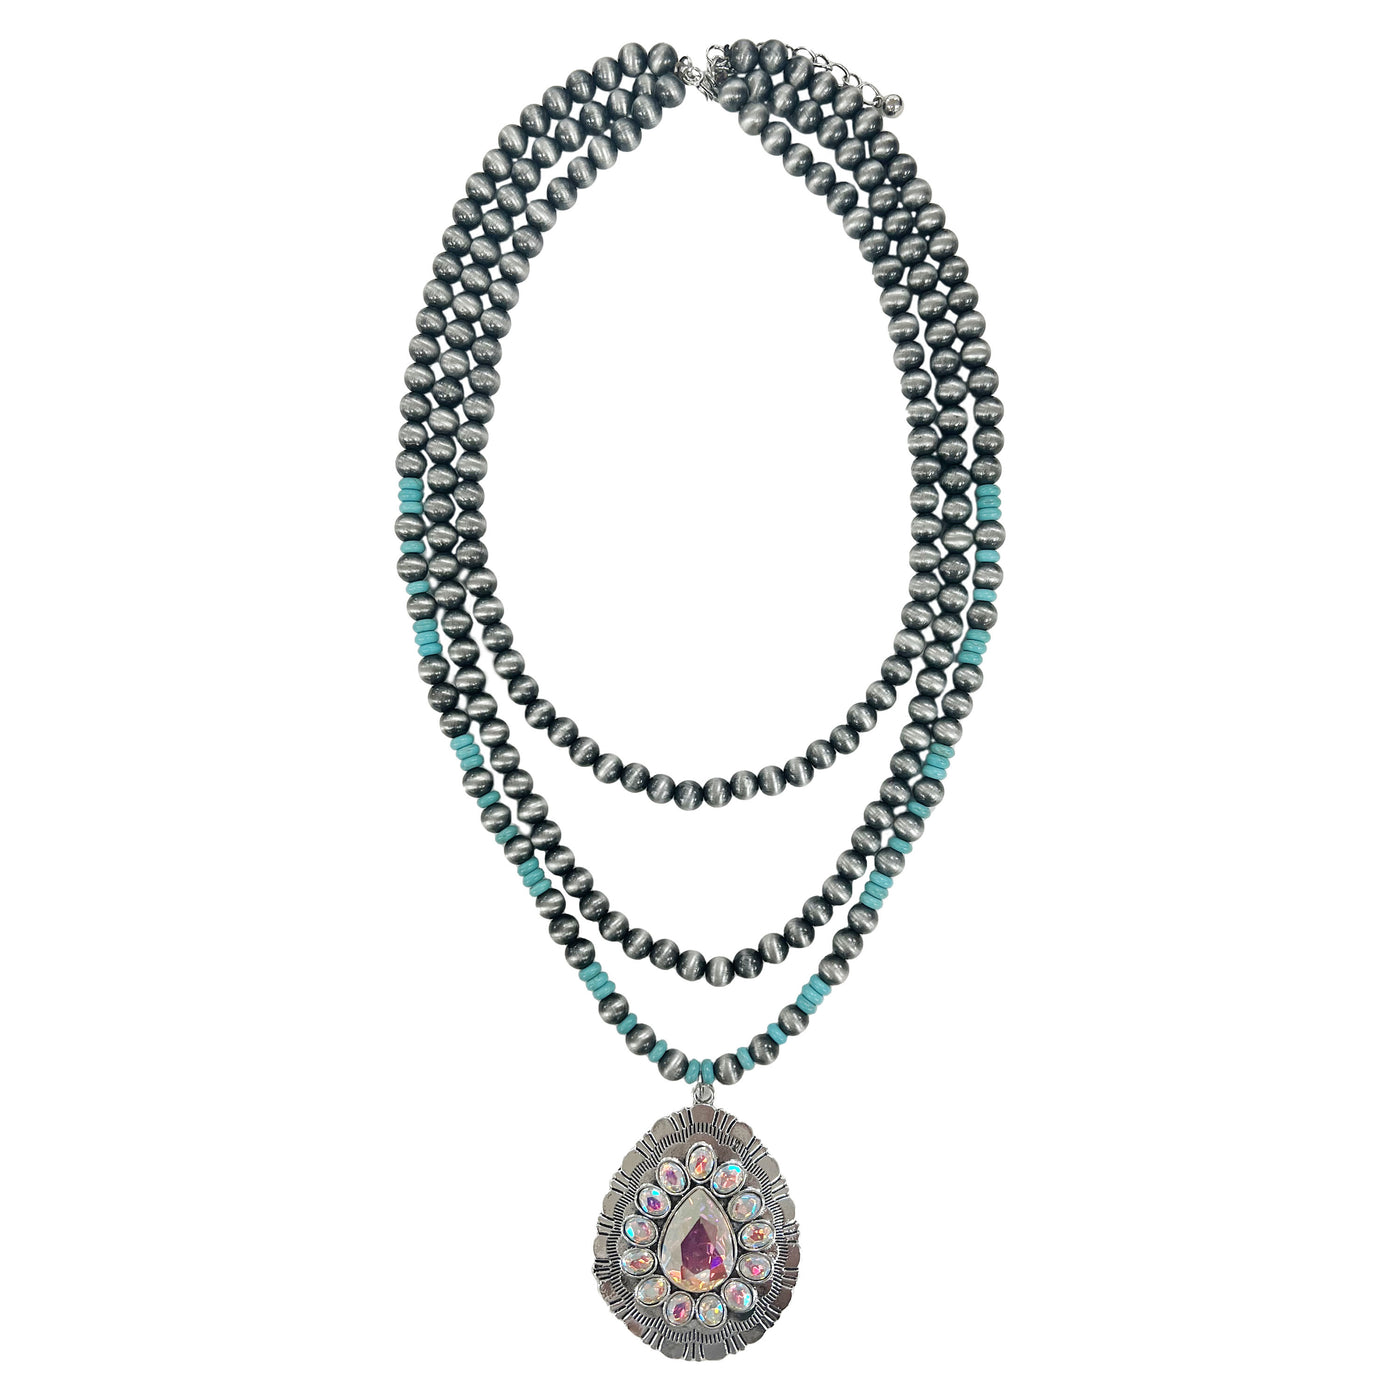 Special Treatment Silver and Turquoise Layered Necklace